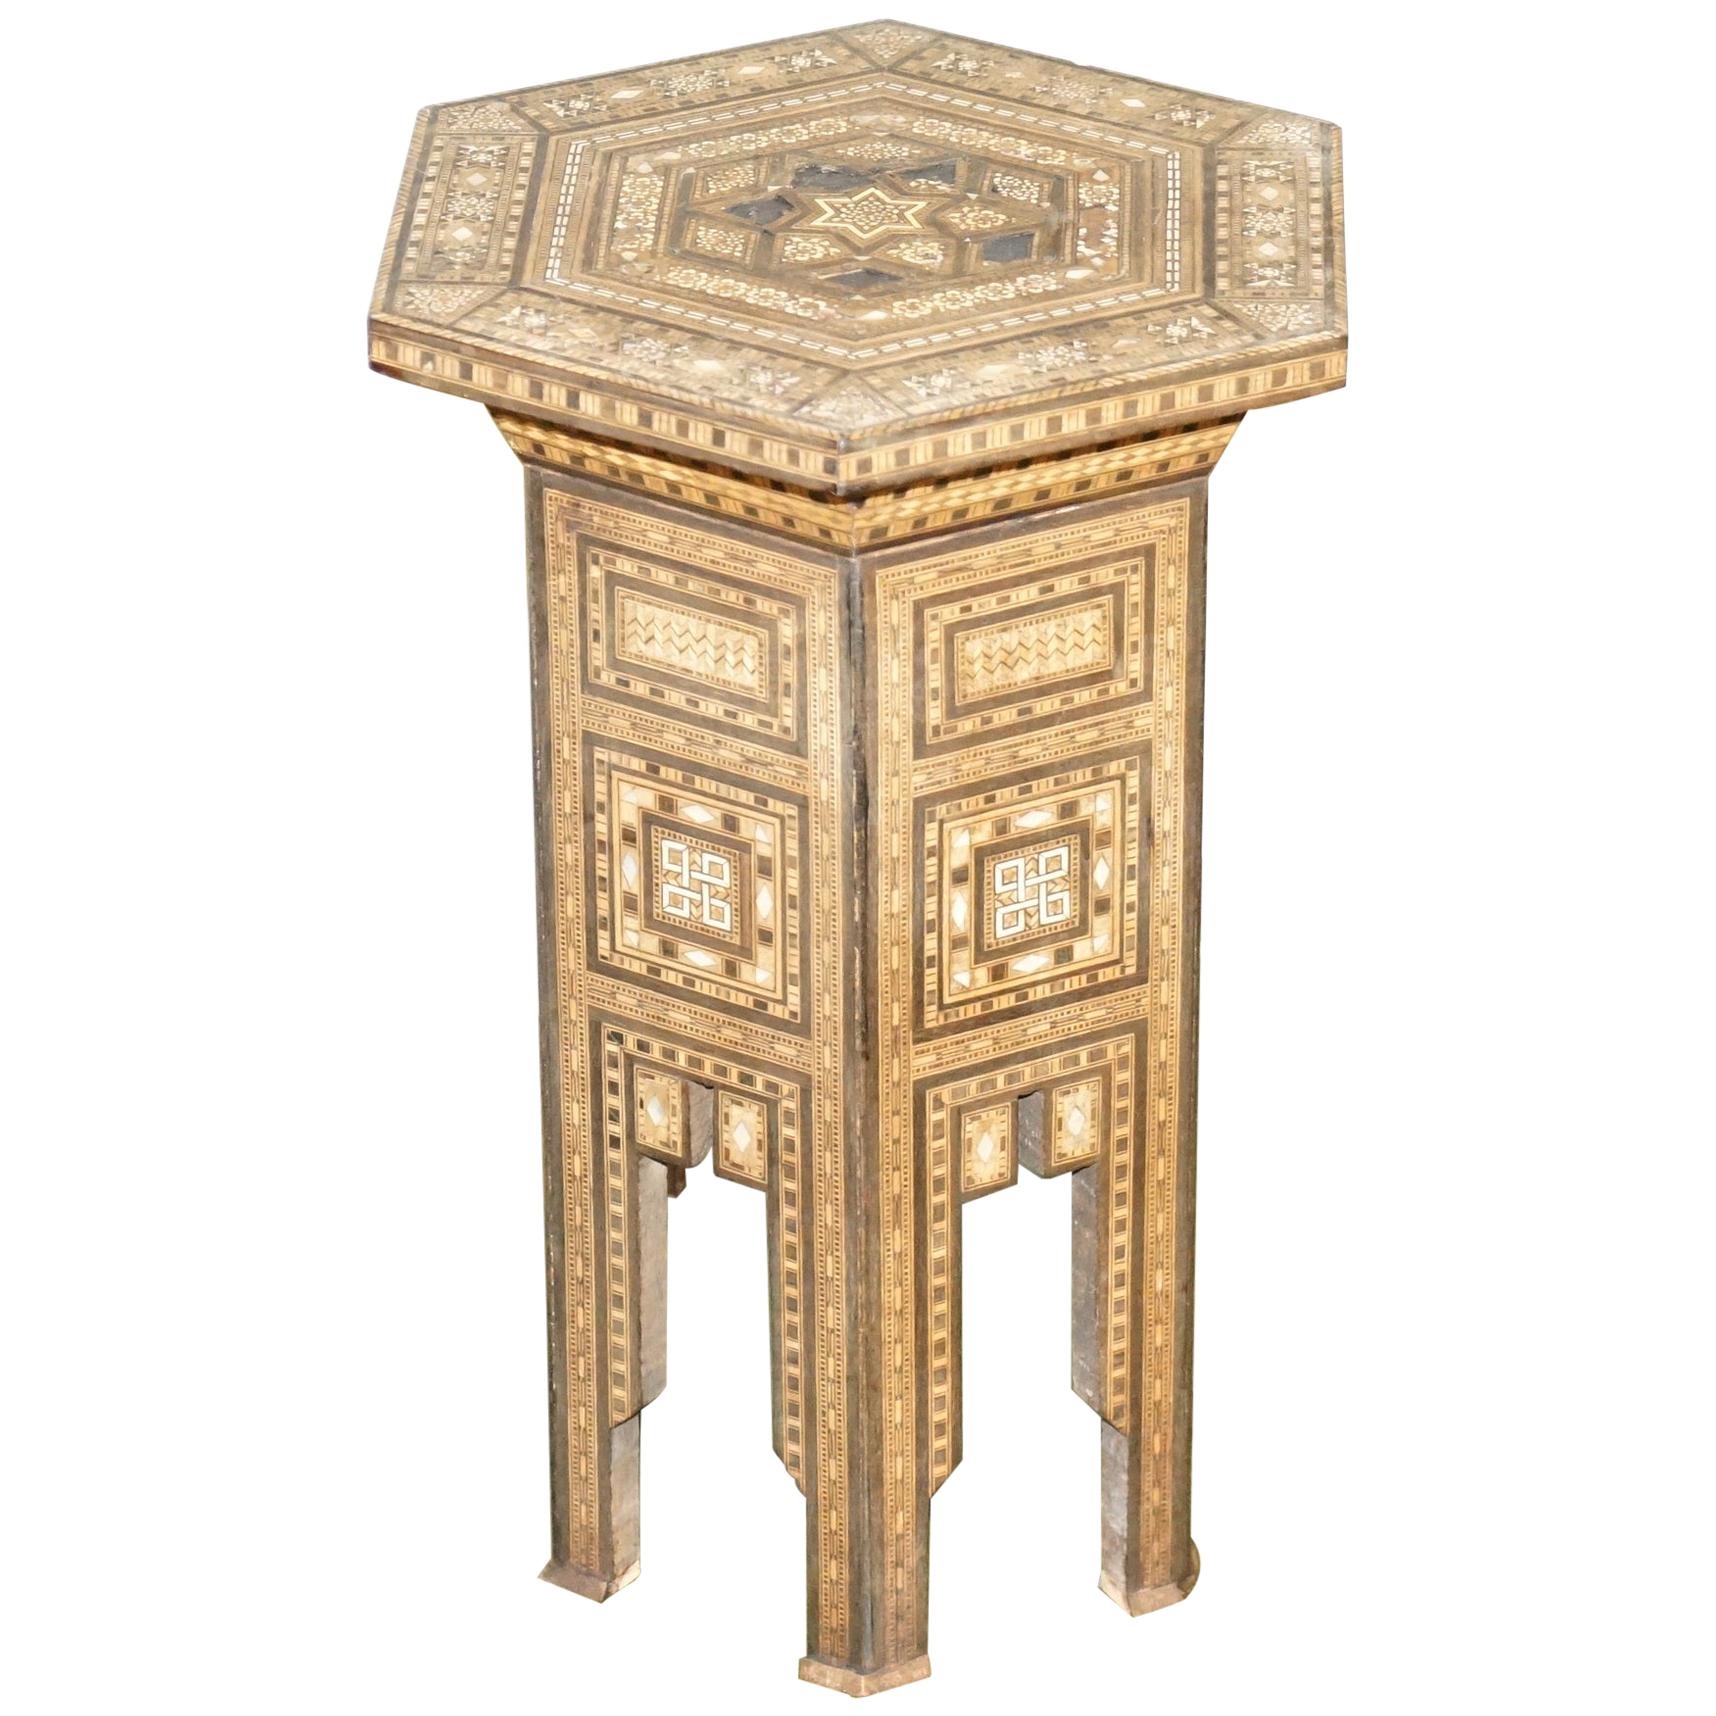 Rare circa 1900 Marquetry Inlaid Side Table Retailed Through Liberty's London